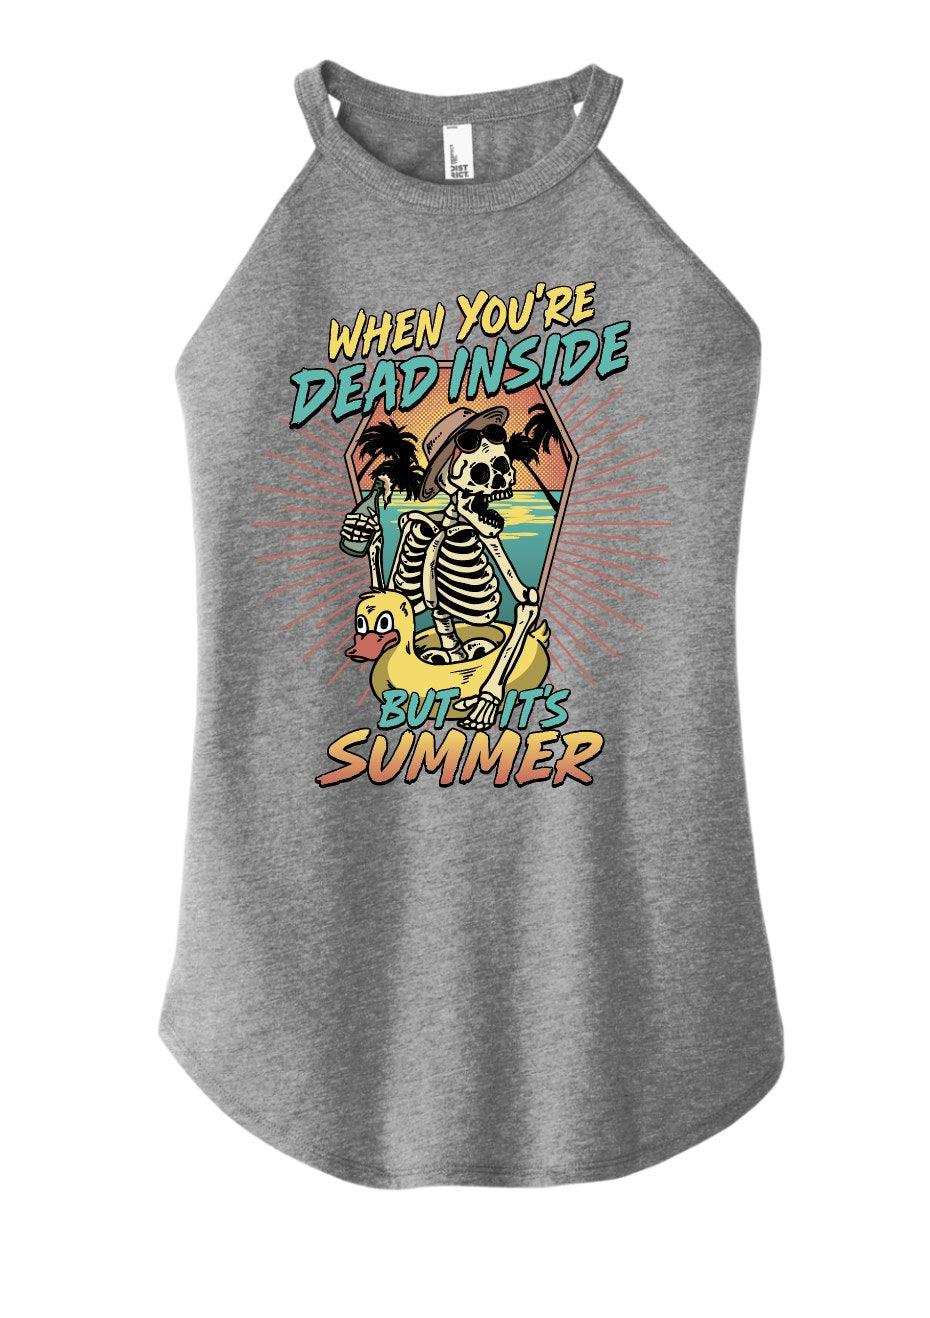 When you're dead inside but it's summer - Signastyle Boutique